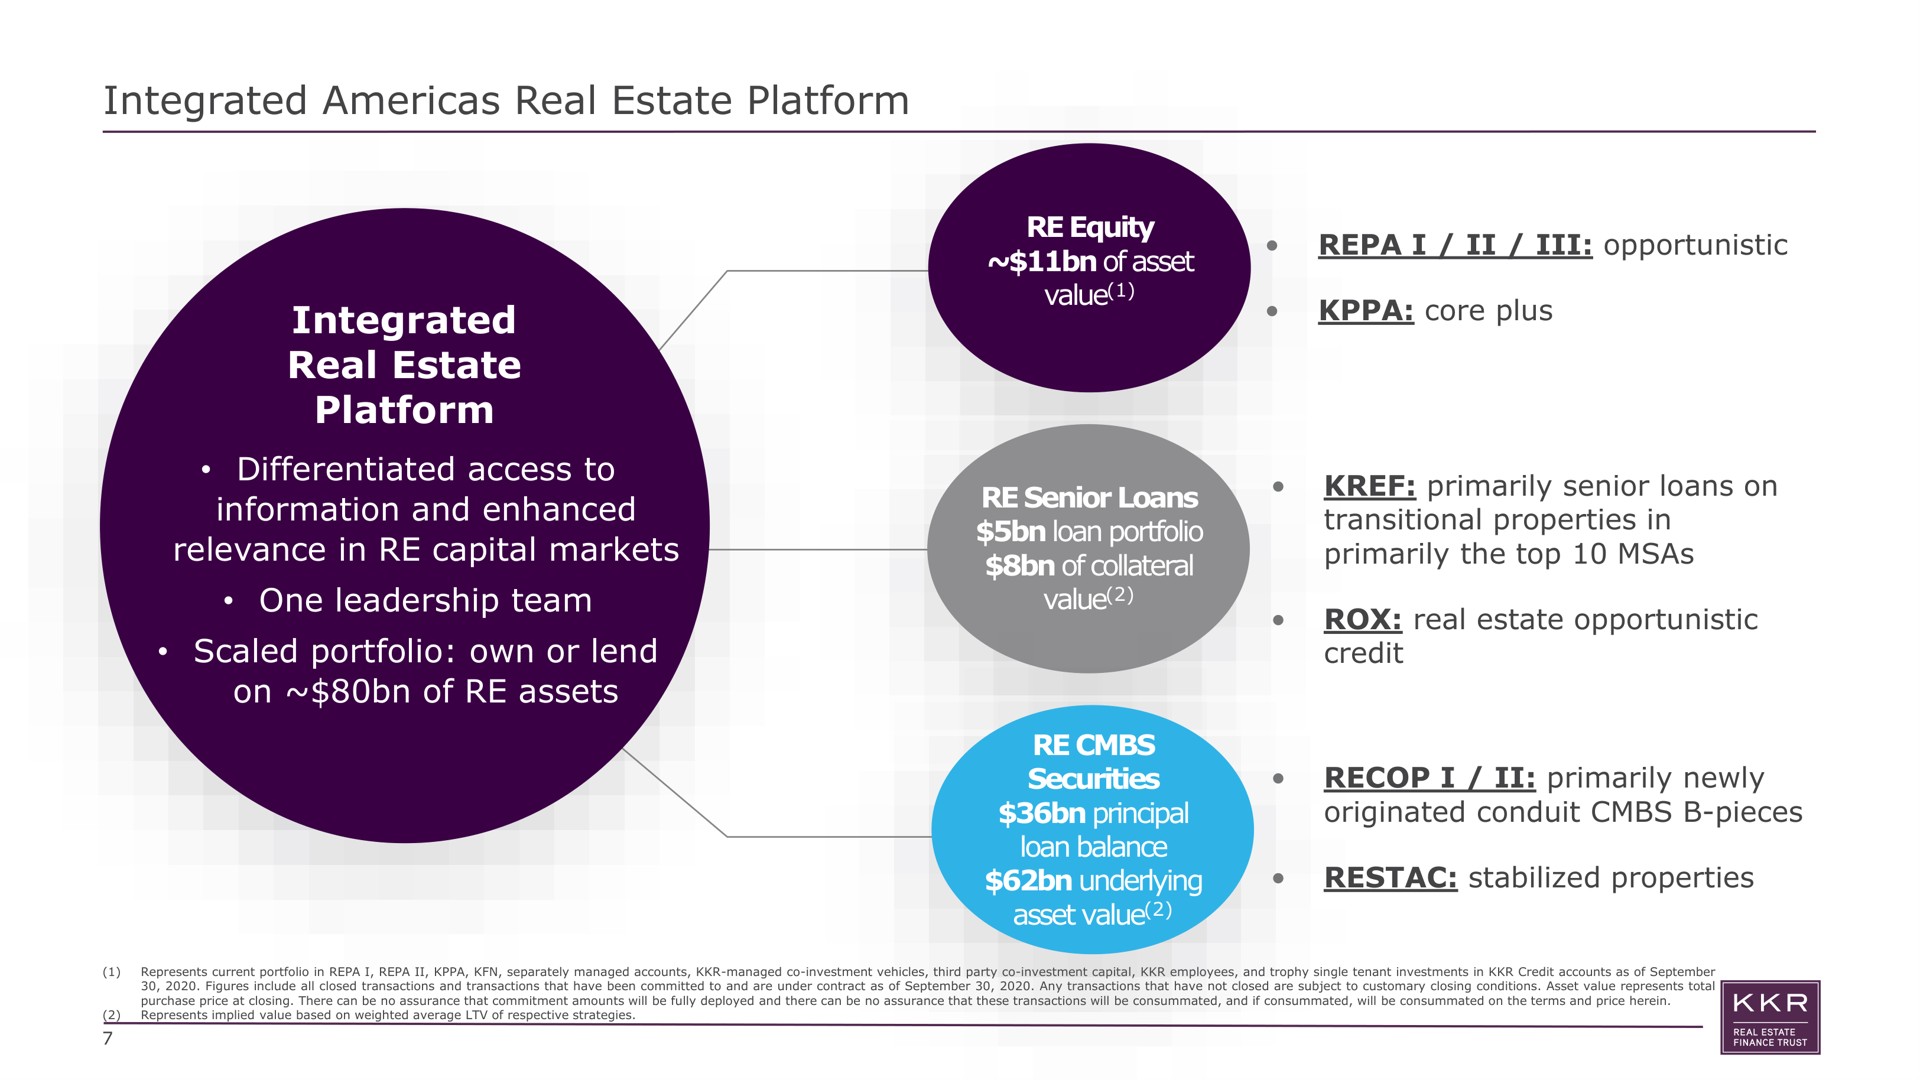 integrated real estate platform integrated real estate platform differentiated access to information and enhanced relevance in capital markets one leadership team scaled portfolio own or lend on of assets equity of asset value i opportunistic core plus senior loans loan portfolio of collateral value primarily senior loans on transitional properties in primarily the top rox real estate opportunistic credit securities principal loan balance underlying asset value i primarily newly originated conduit pieces stabilized properties | KKR Real Estate Finance Trust